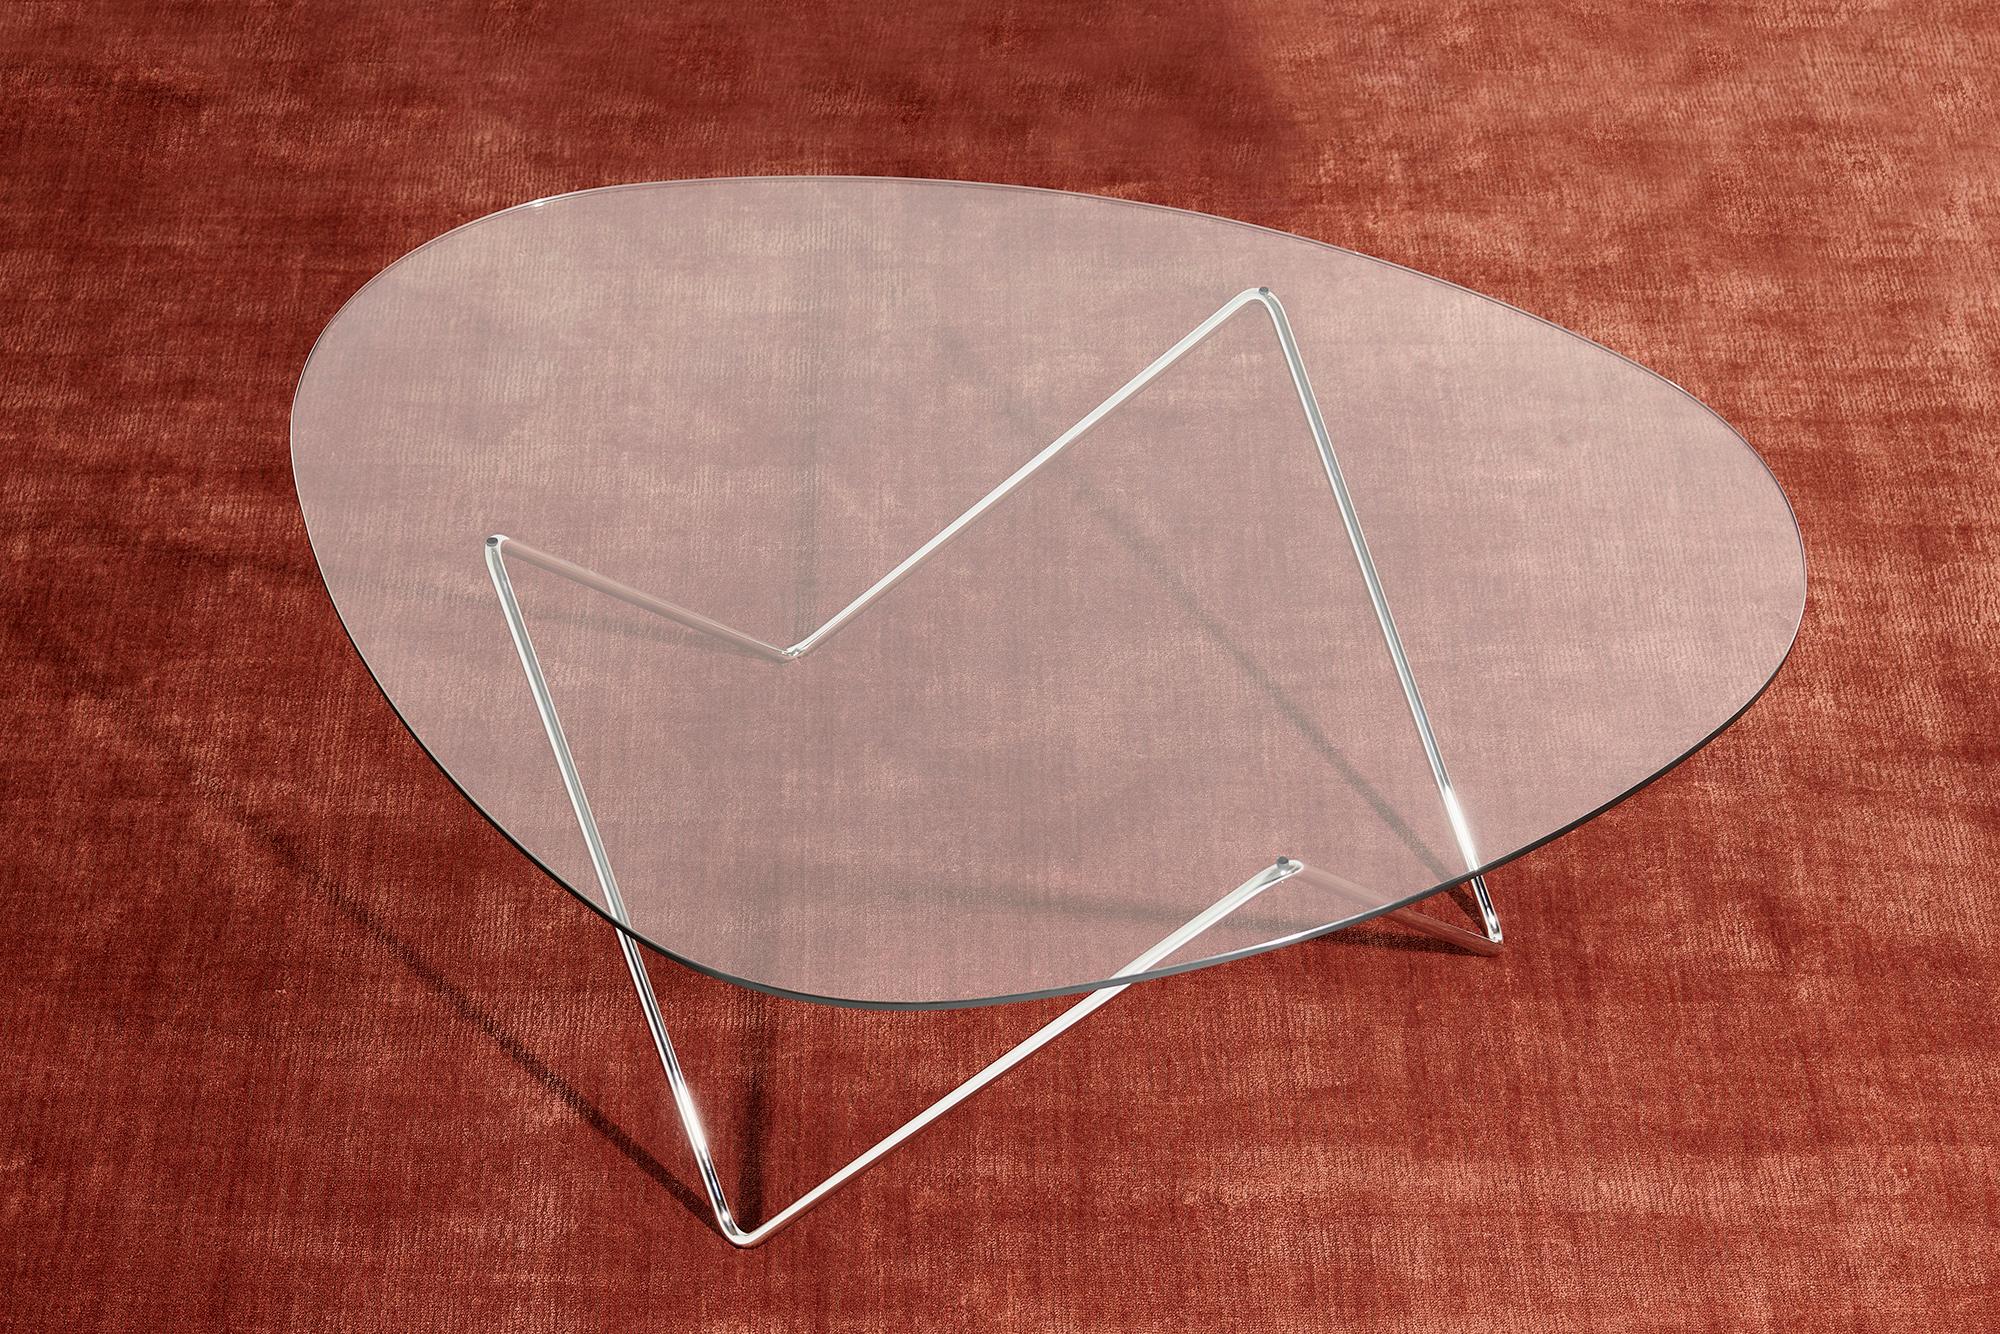 Barba Corsini Pedrera coffee table in chrome for Gubi. The Pedrera coffee table was designed in 1955 by Barba Corsini for the loft space at La Pedrera, the famous landmark in Barcelona. Executed in glass with a chrome base, the table fits well into